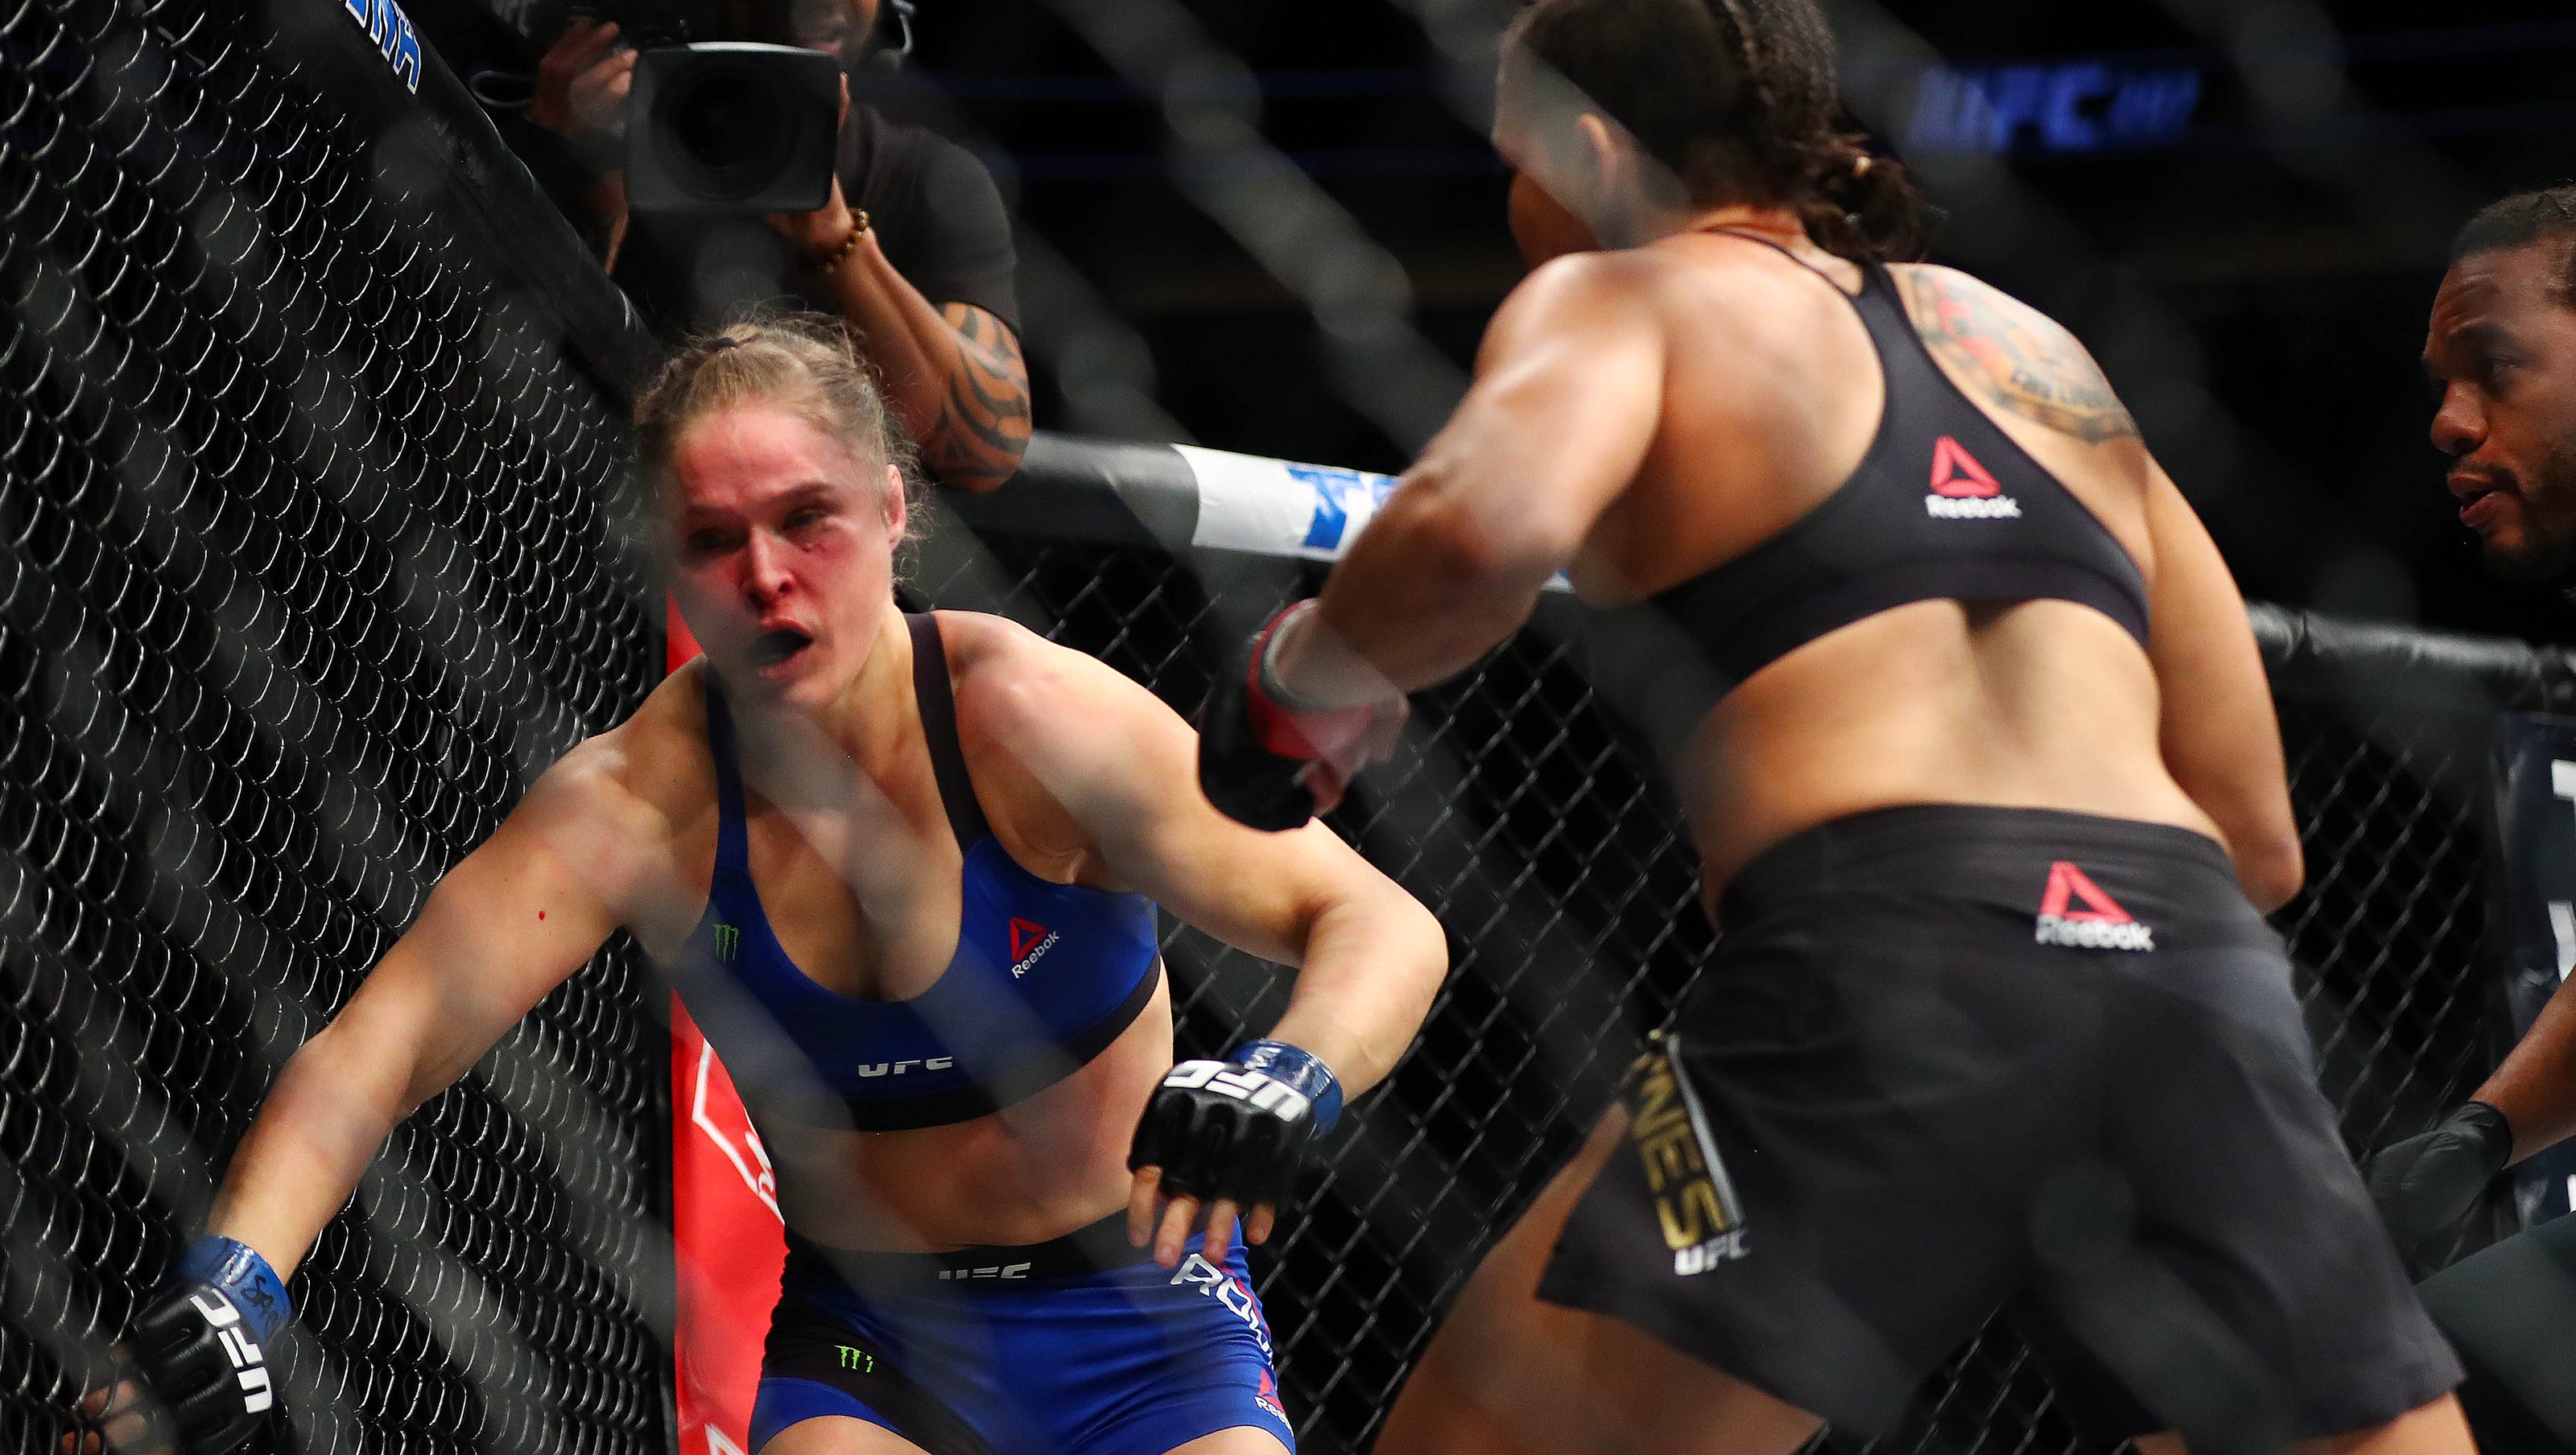 Coach may have doomed Ronda Rousey's fight, career